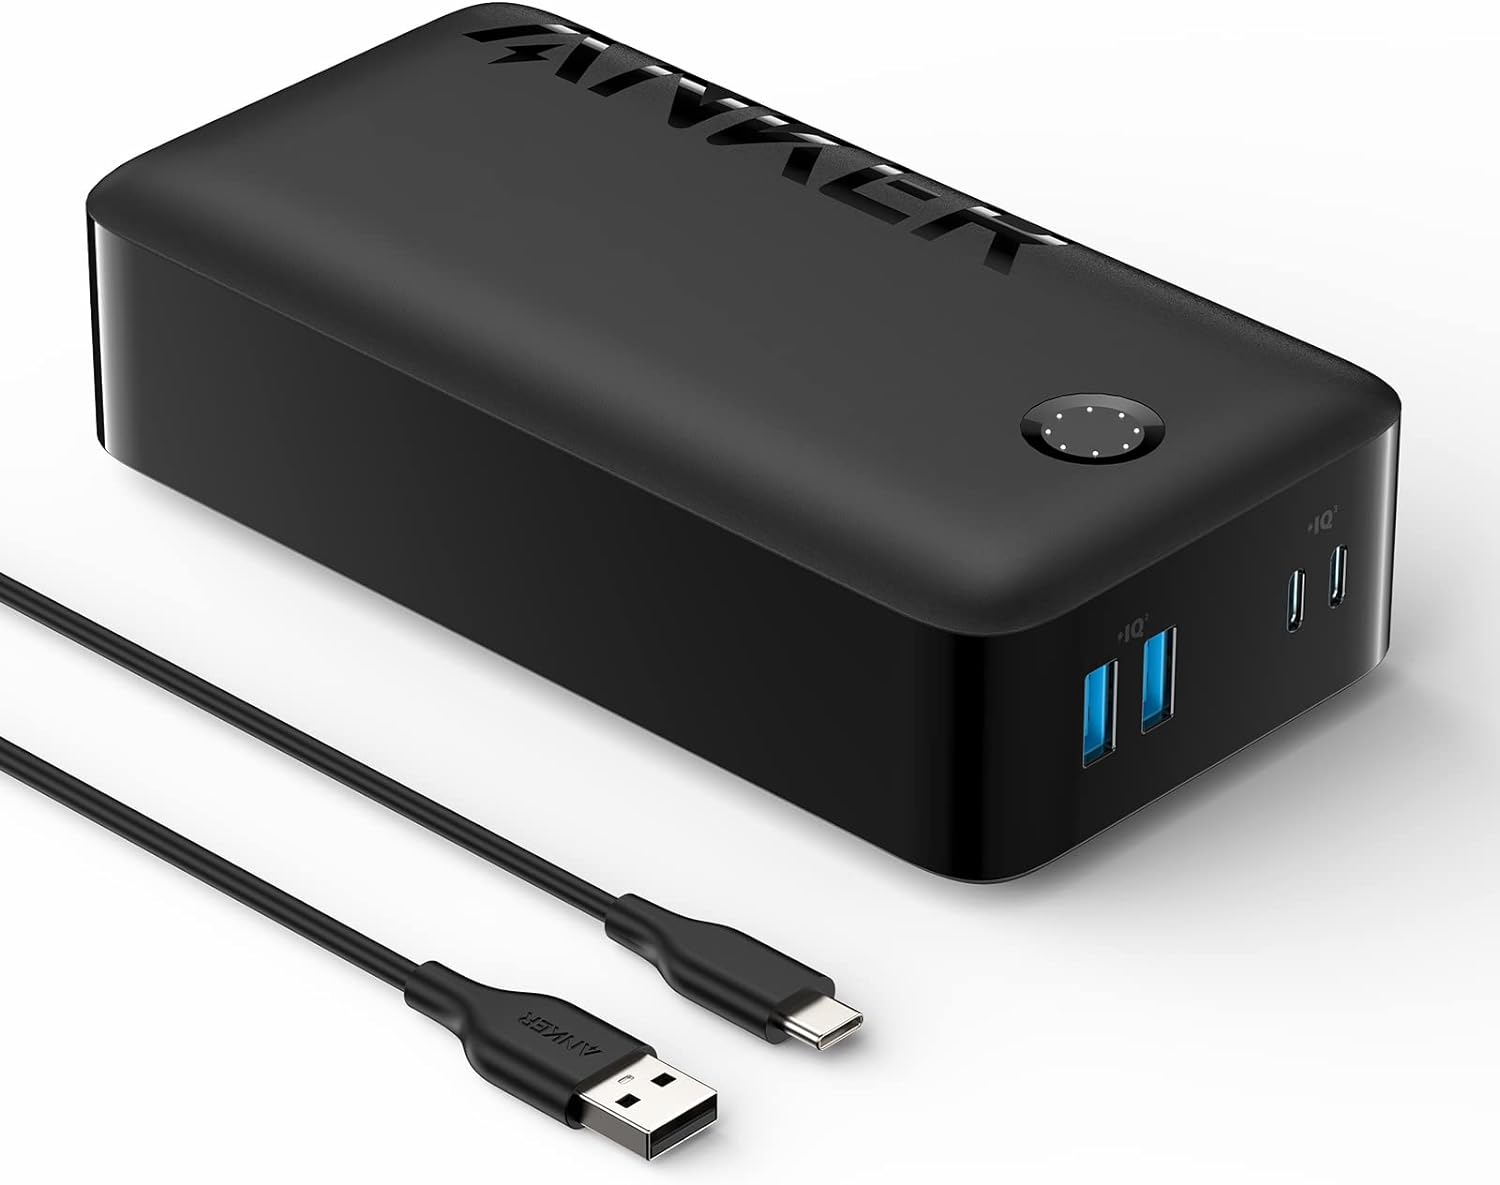 Anker A1377H11 347 Portable Charger, Power Bank, 40K 30W Battery Pack with USB-C High-Speed Charging